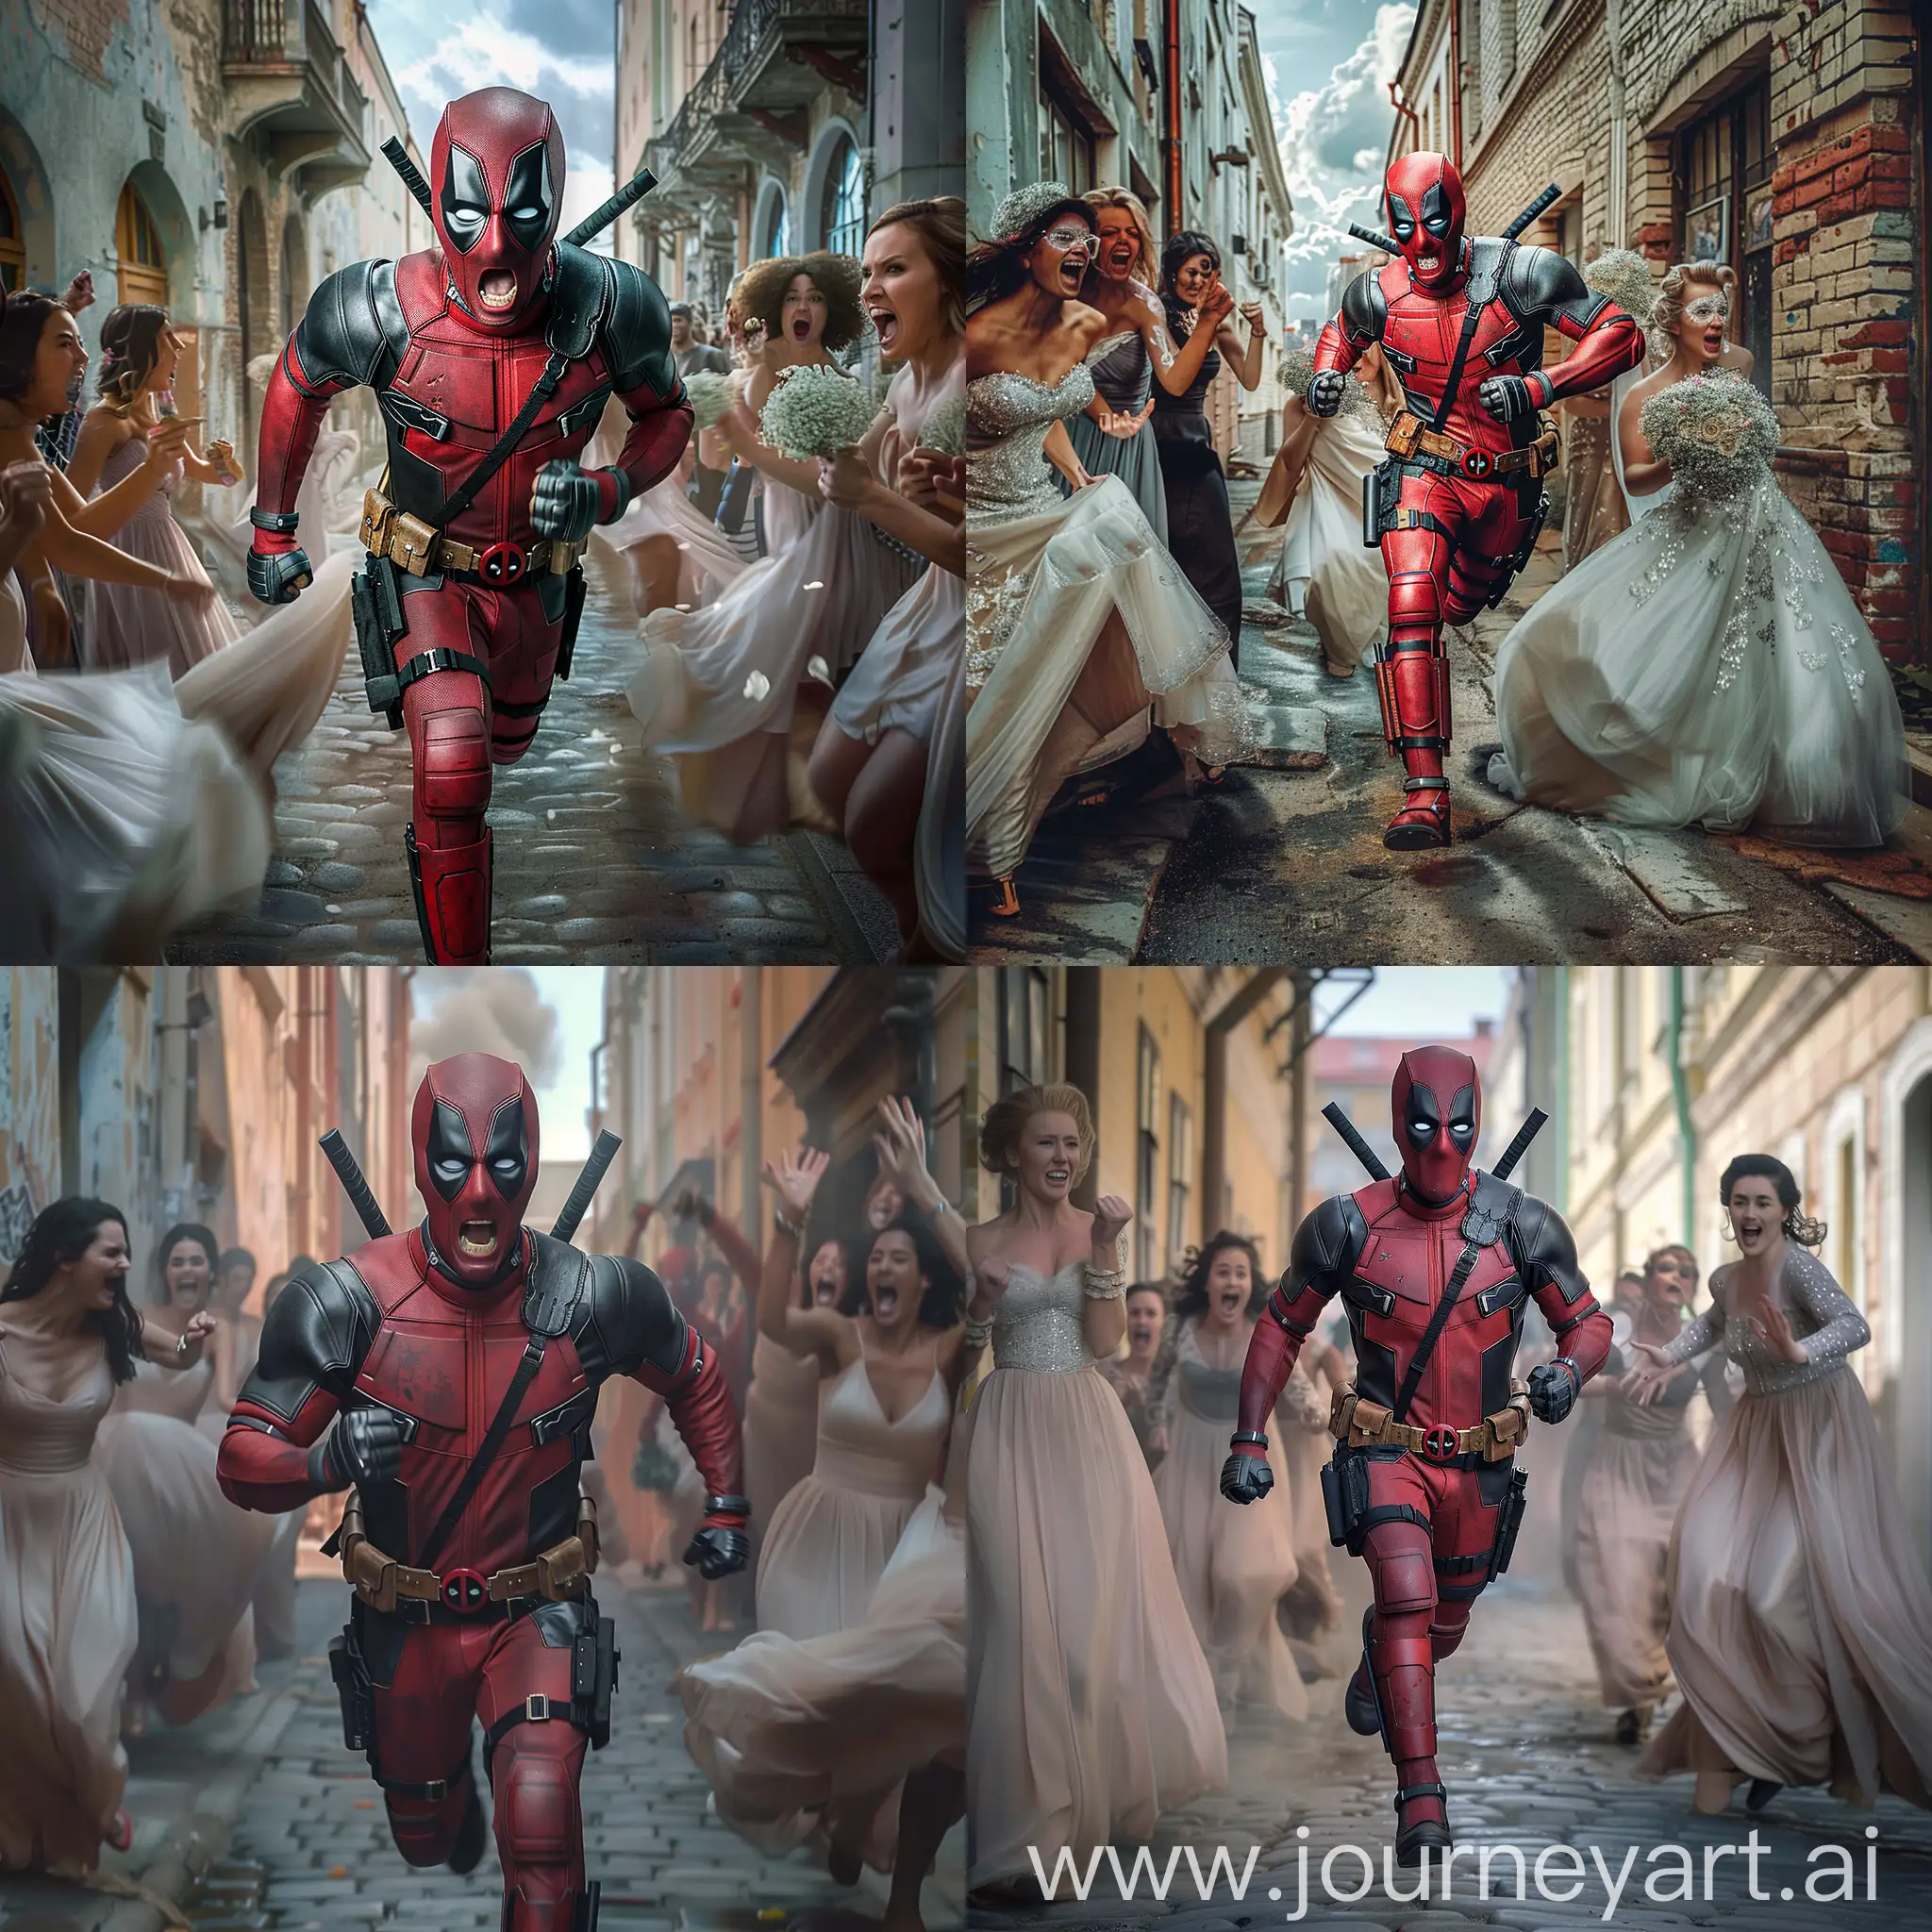 Deadpool runs from brides down an alley in a Russian city, his gaze looks scared, brides scream and rejoice like fans, comical scene, dynamic, 8k, ultra realistic